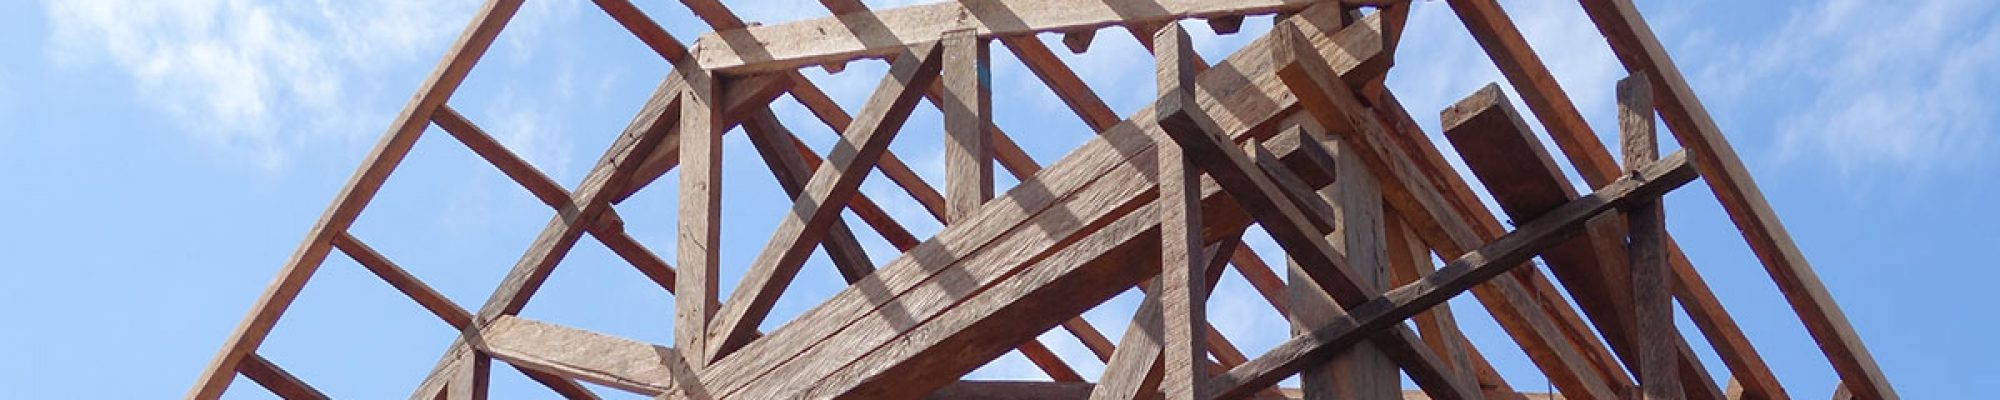 Timber framing of house walls and roof